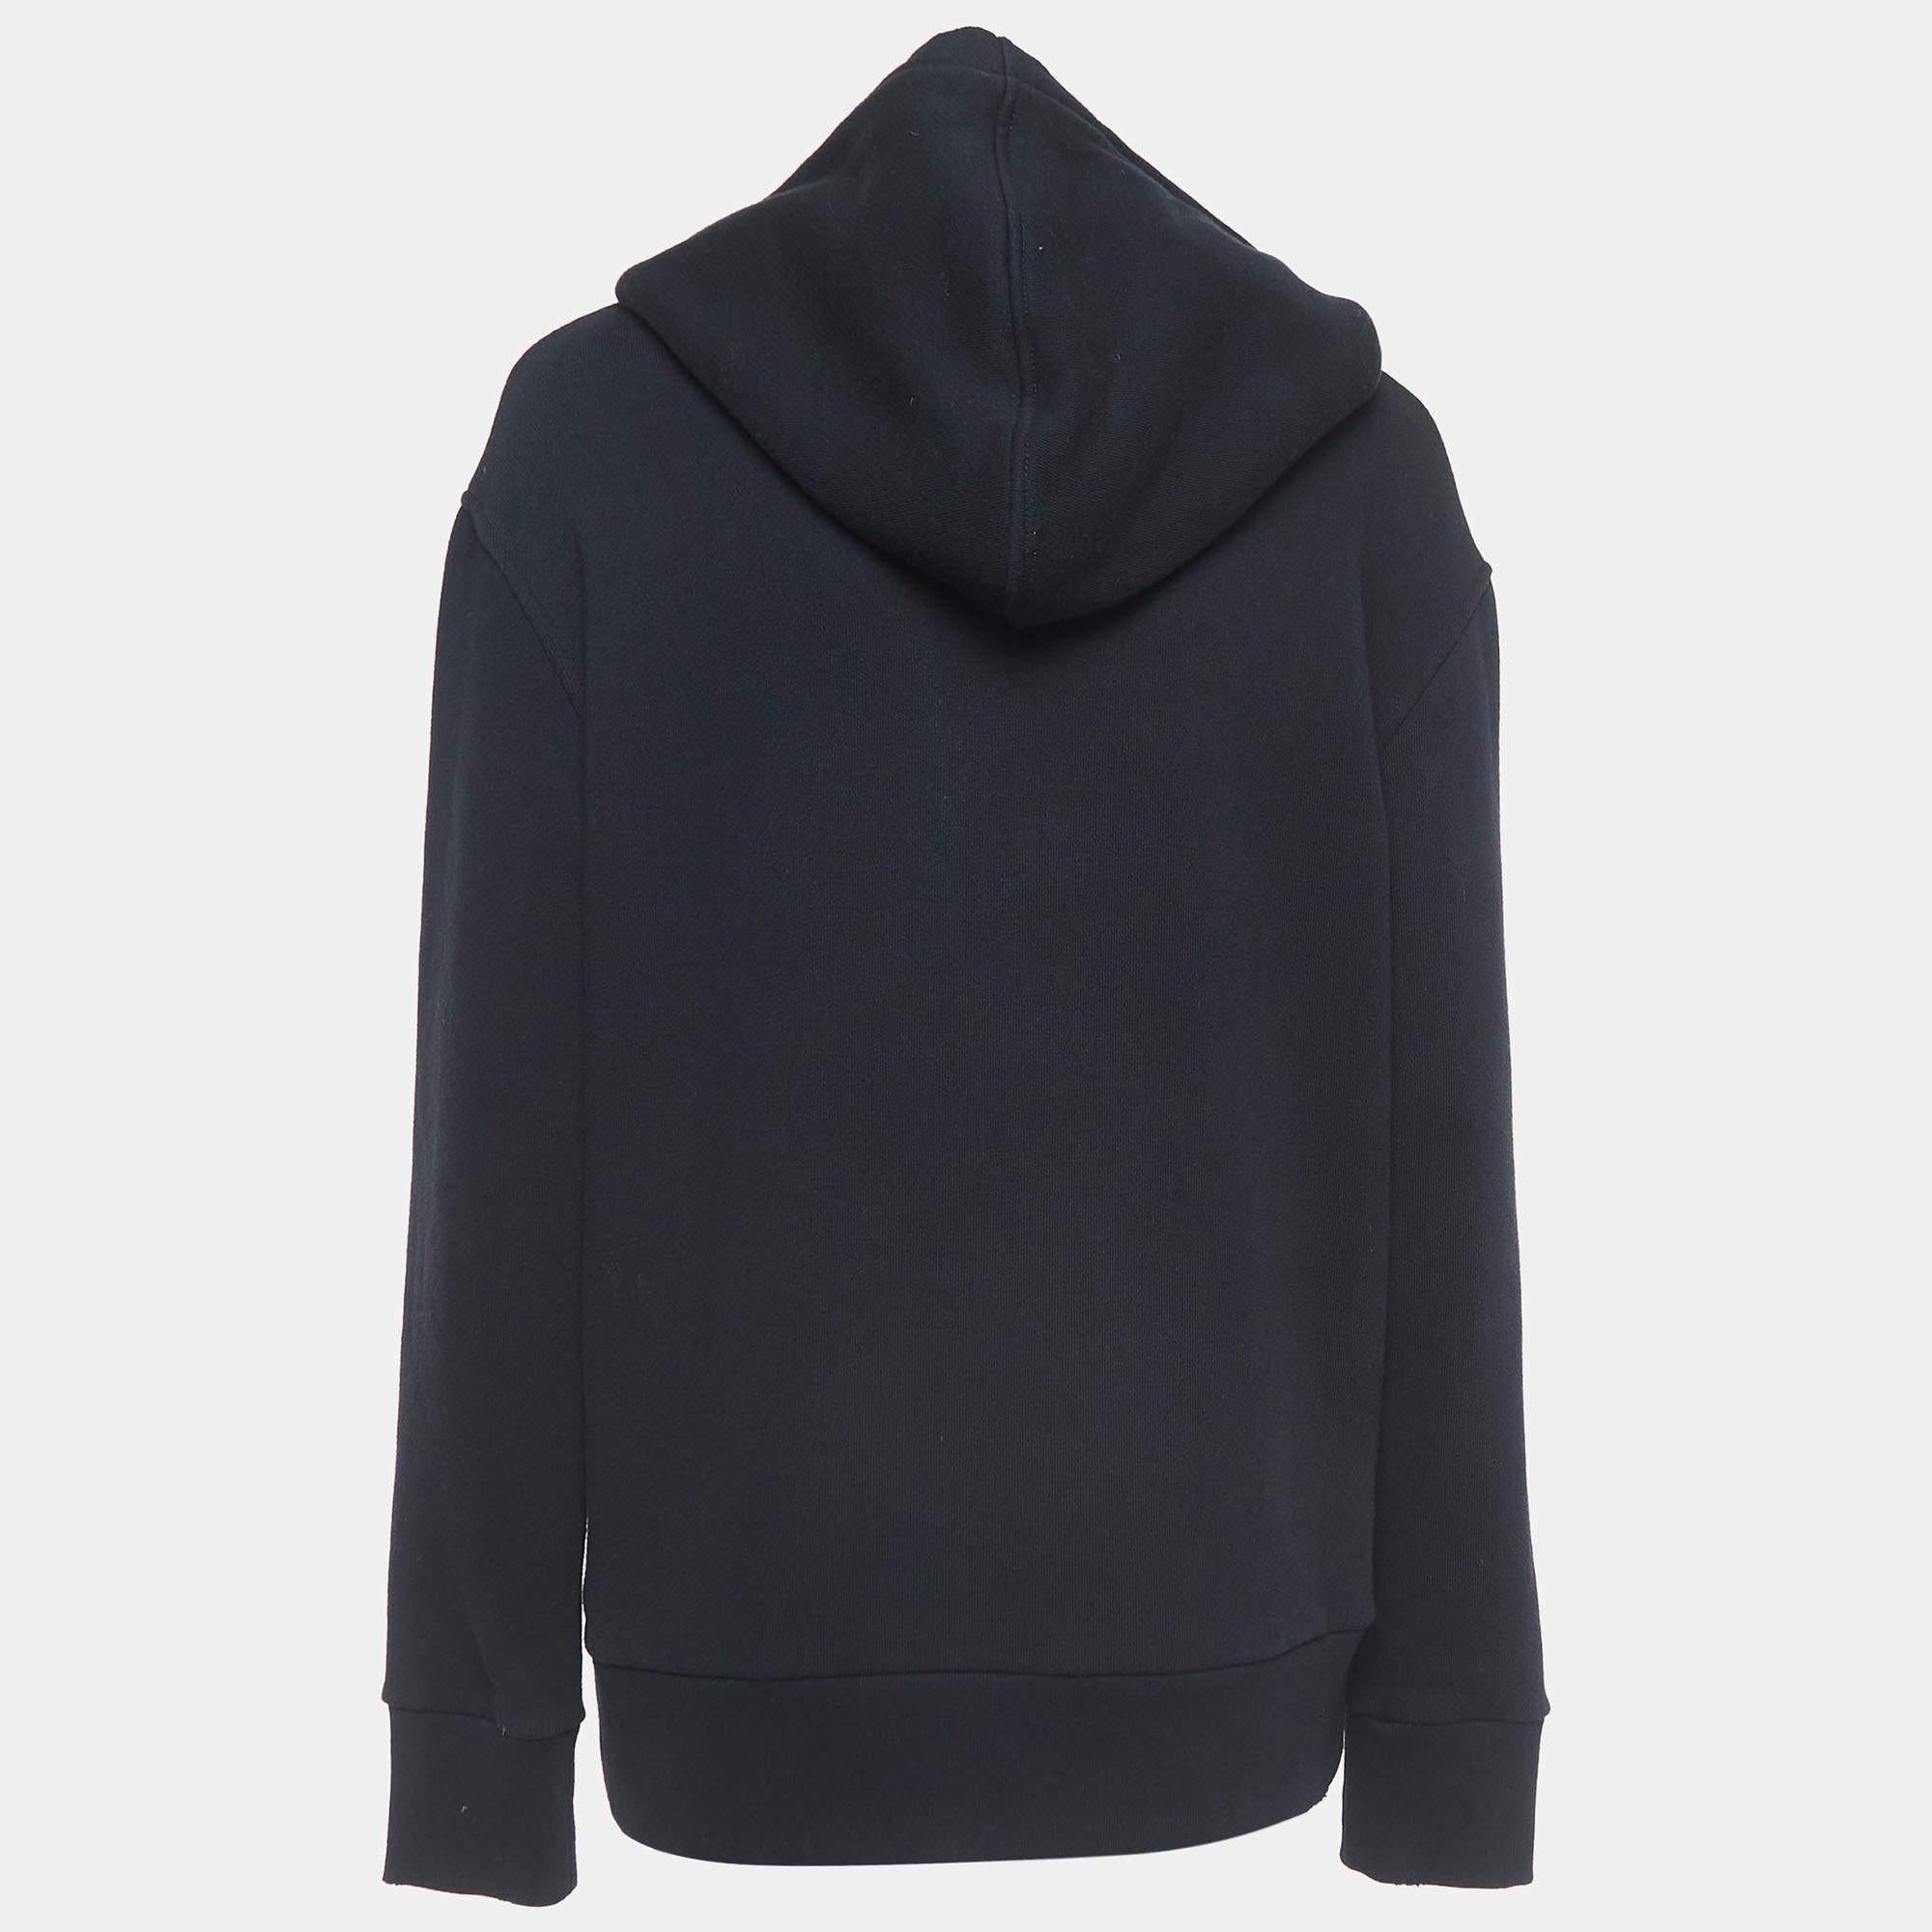 This Gucci black hoodie is all about sporting a classy and comfy style. It is tailored from soft fabric and highlighted by signature accents.

